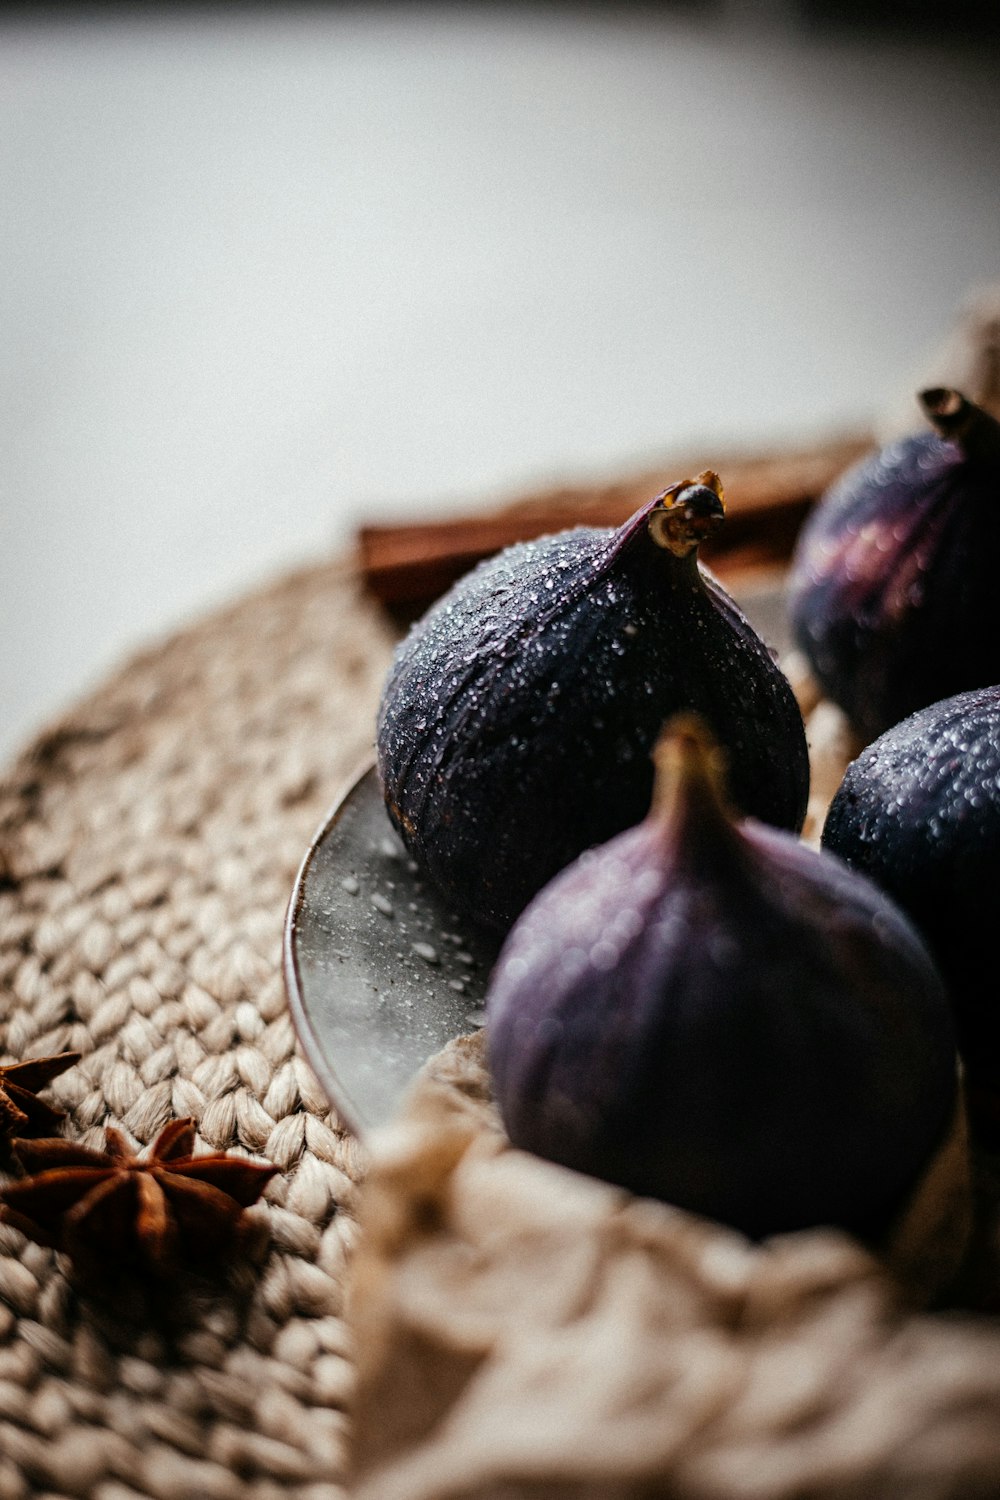 some figs are on a plate on a table